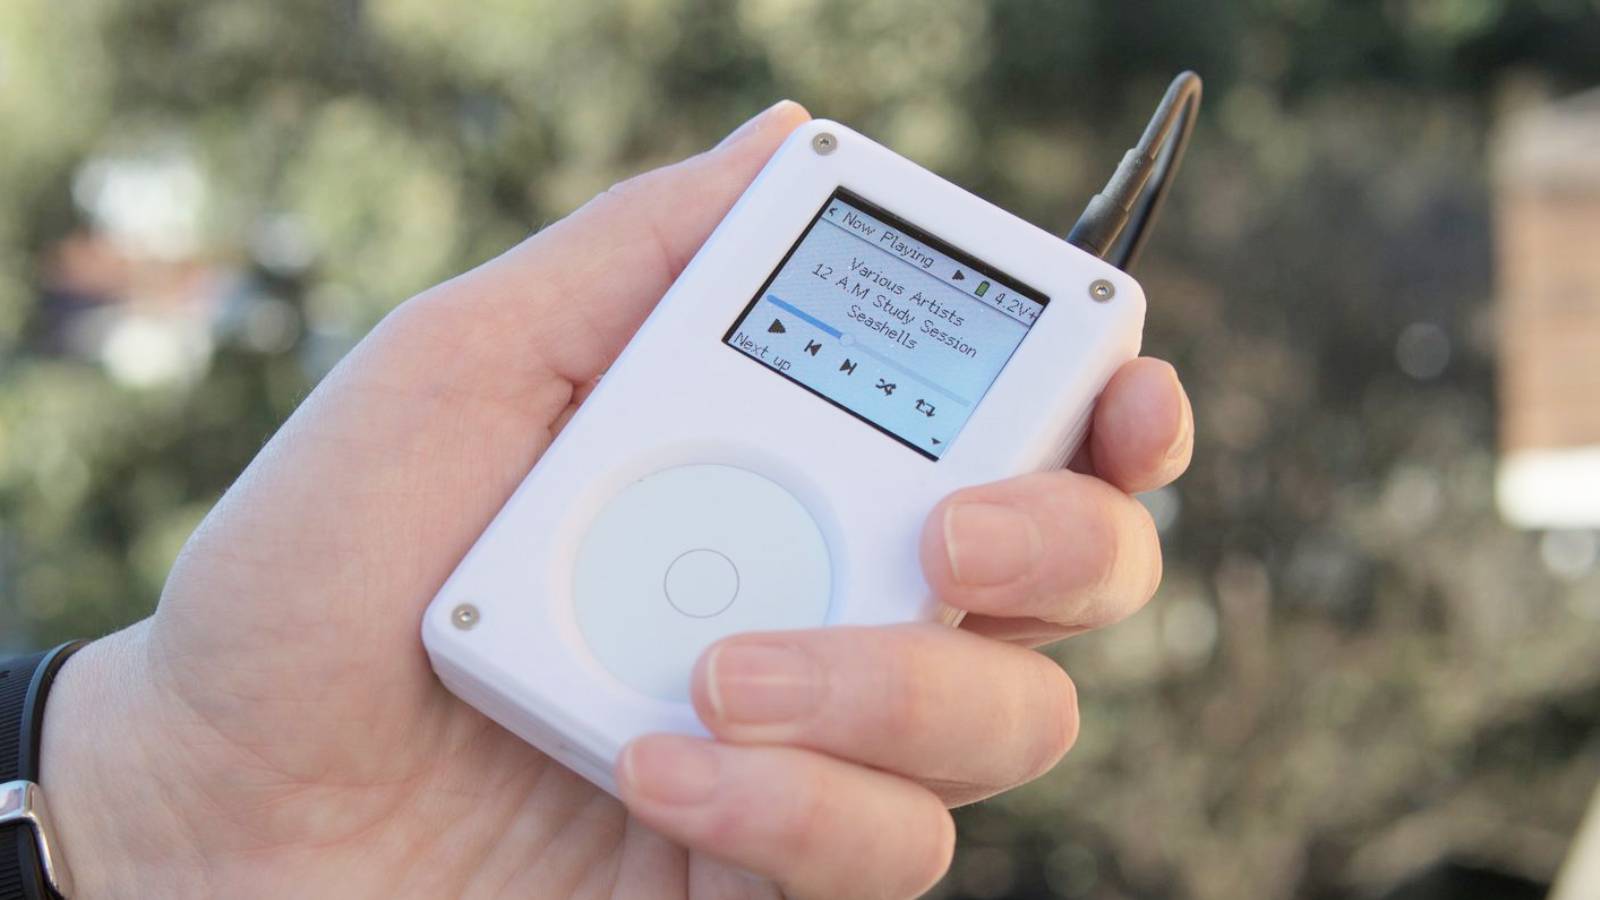 Image from the Tangara crowd funding page, of the Tangara iPod.